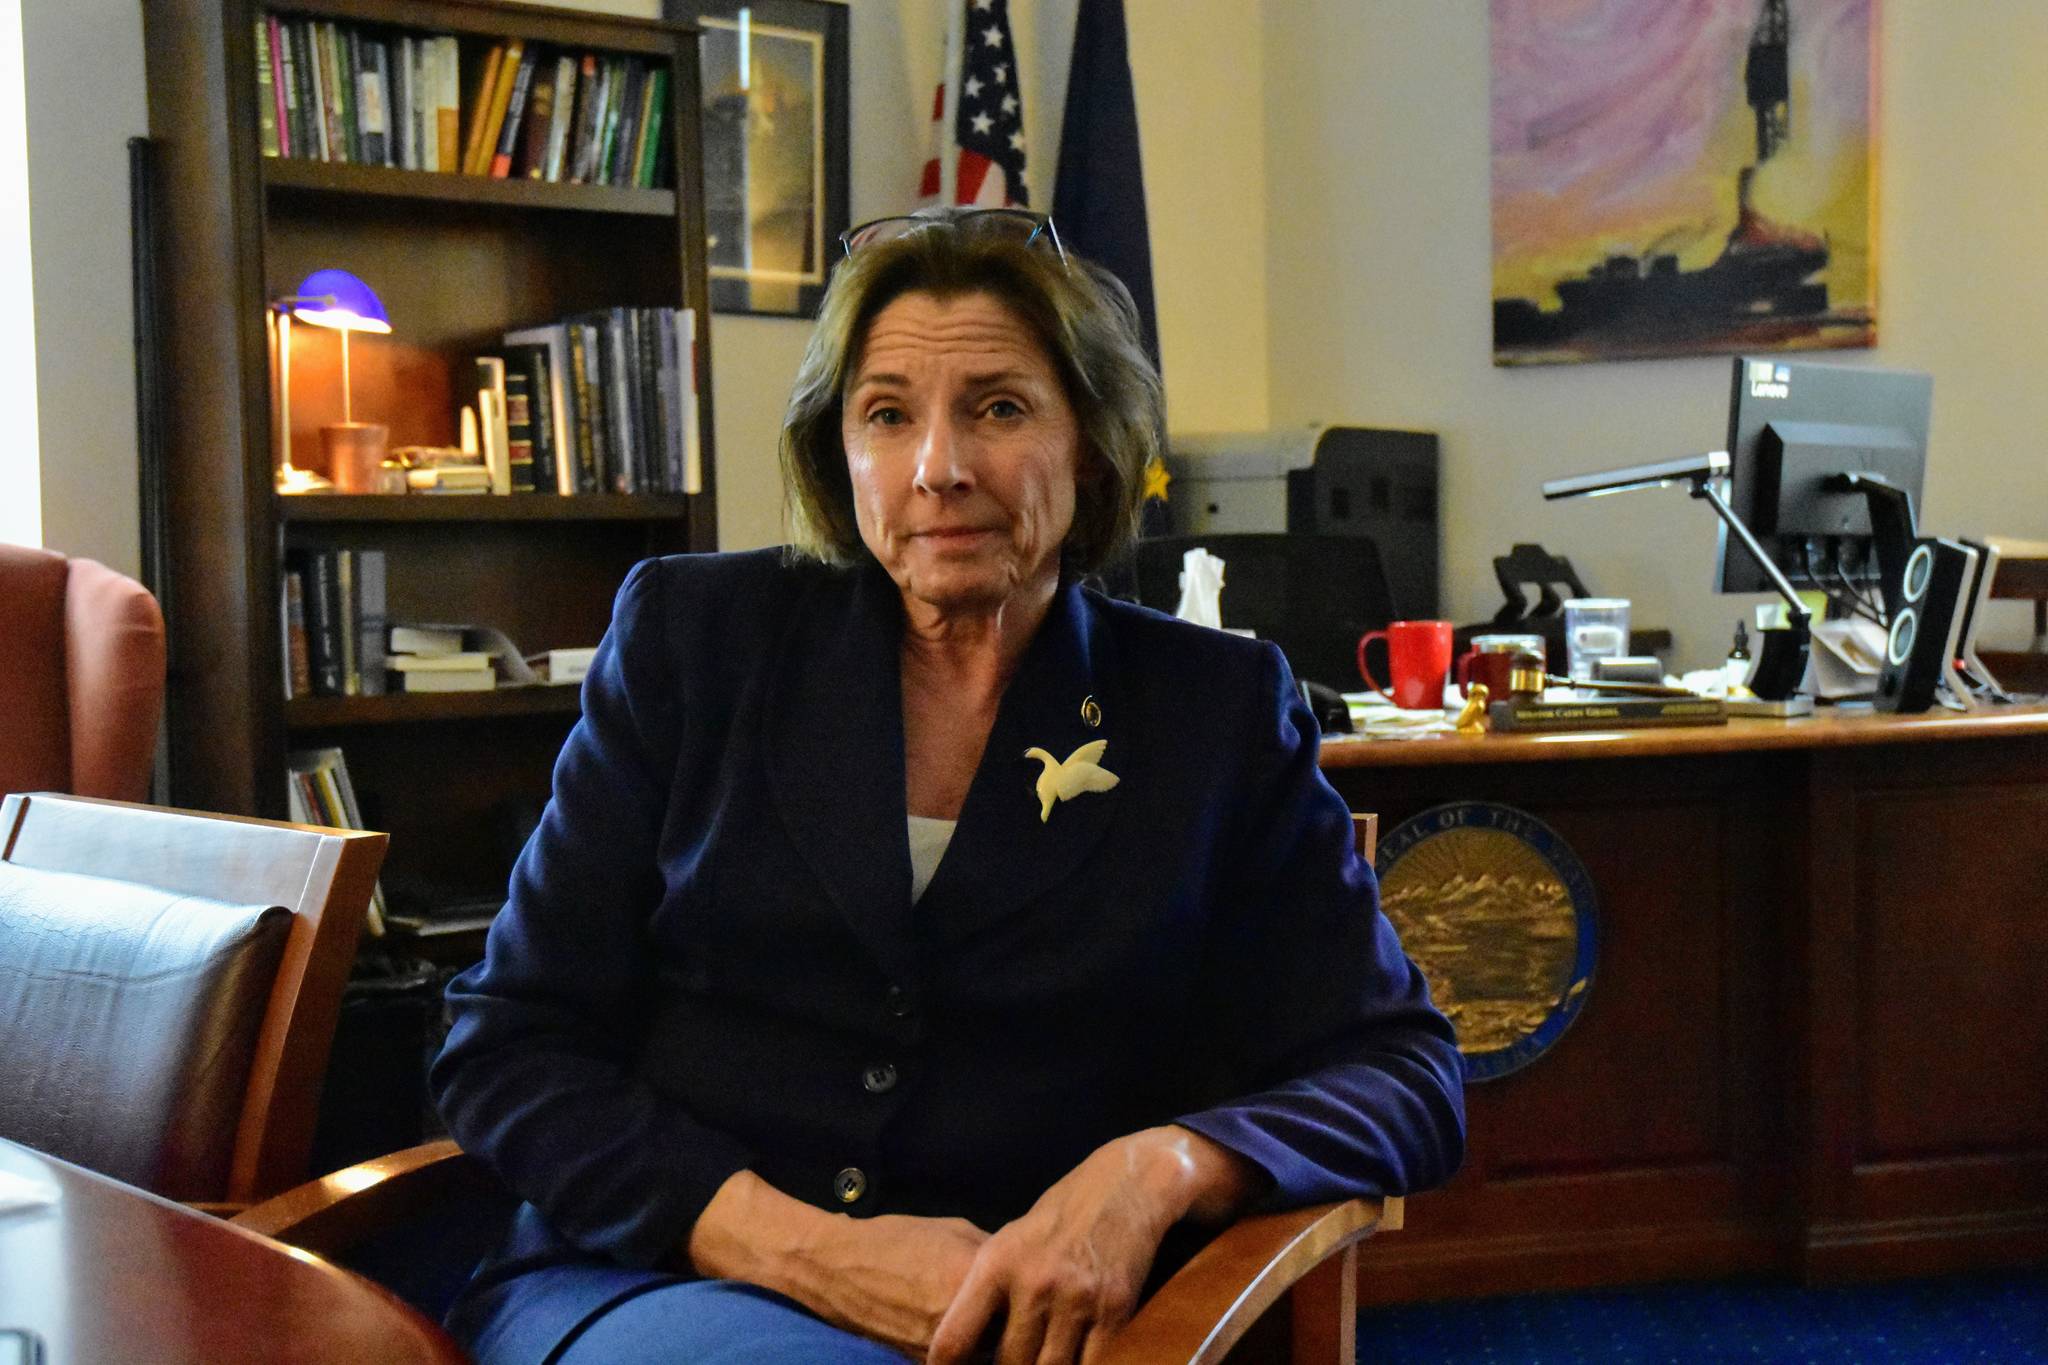 Senate President Cathy Giessel, R-Anchorage, in her office at the State Capitol on Wednesday, Feb. 5, 2020. (Peter Segall | Juneau Empire)